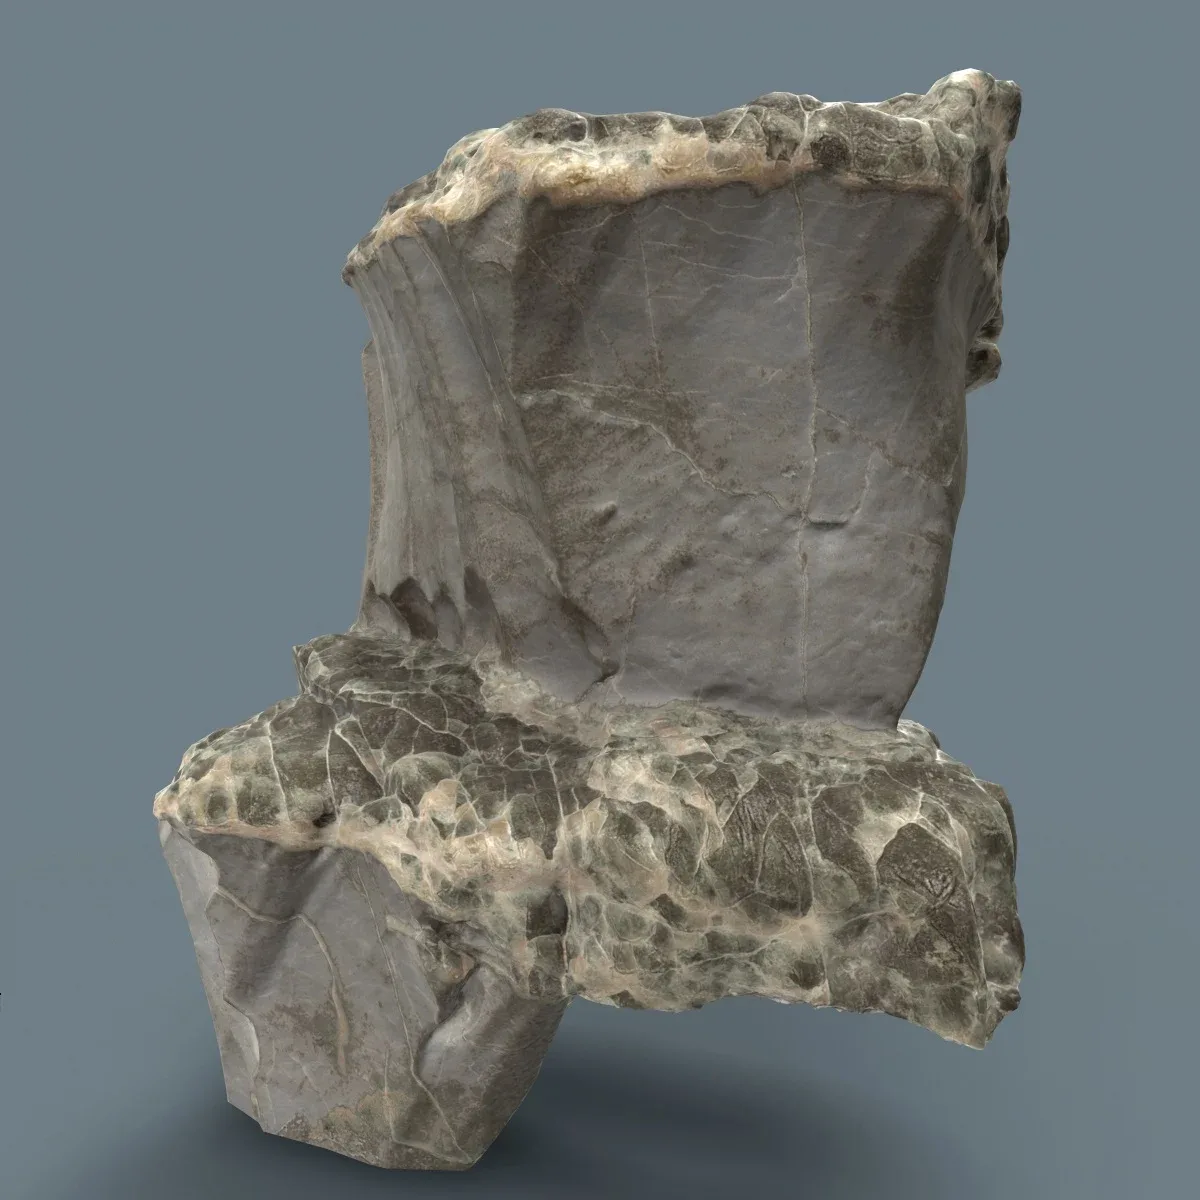 Suiseki Stone 20 from Japan - High-Quality 3D Model with Metallic-Roughness PBR Textures for Games, VR, and Art Projects